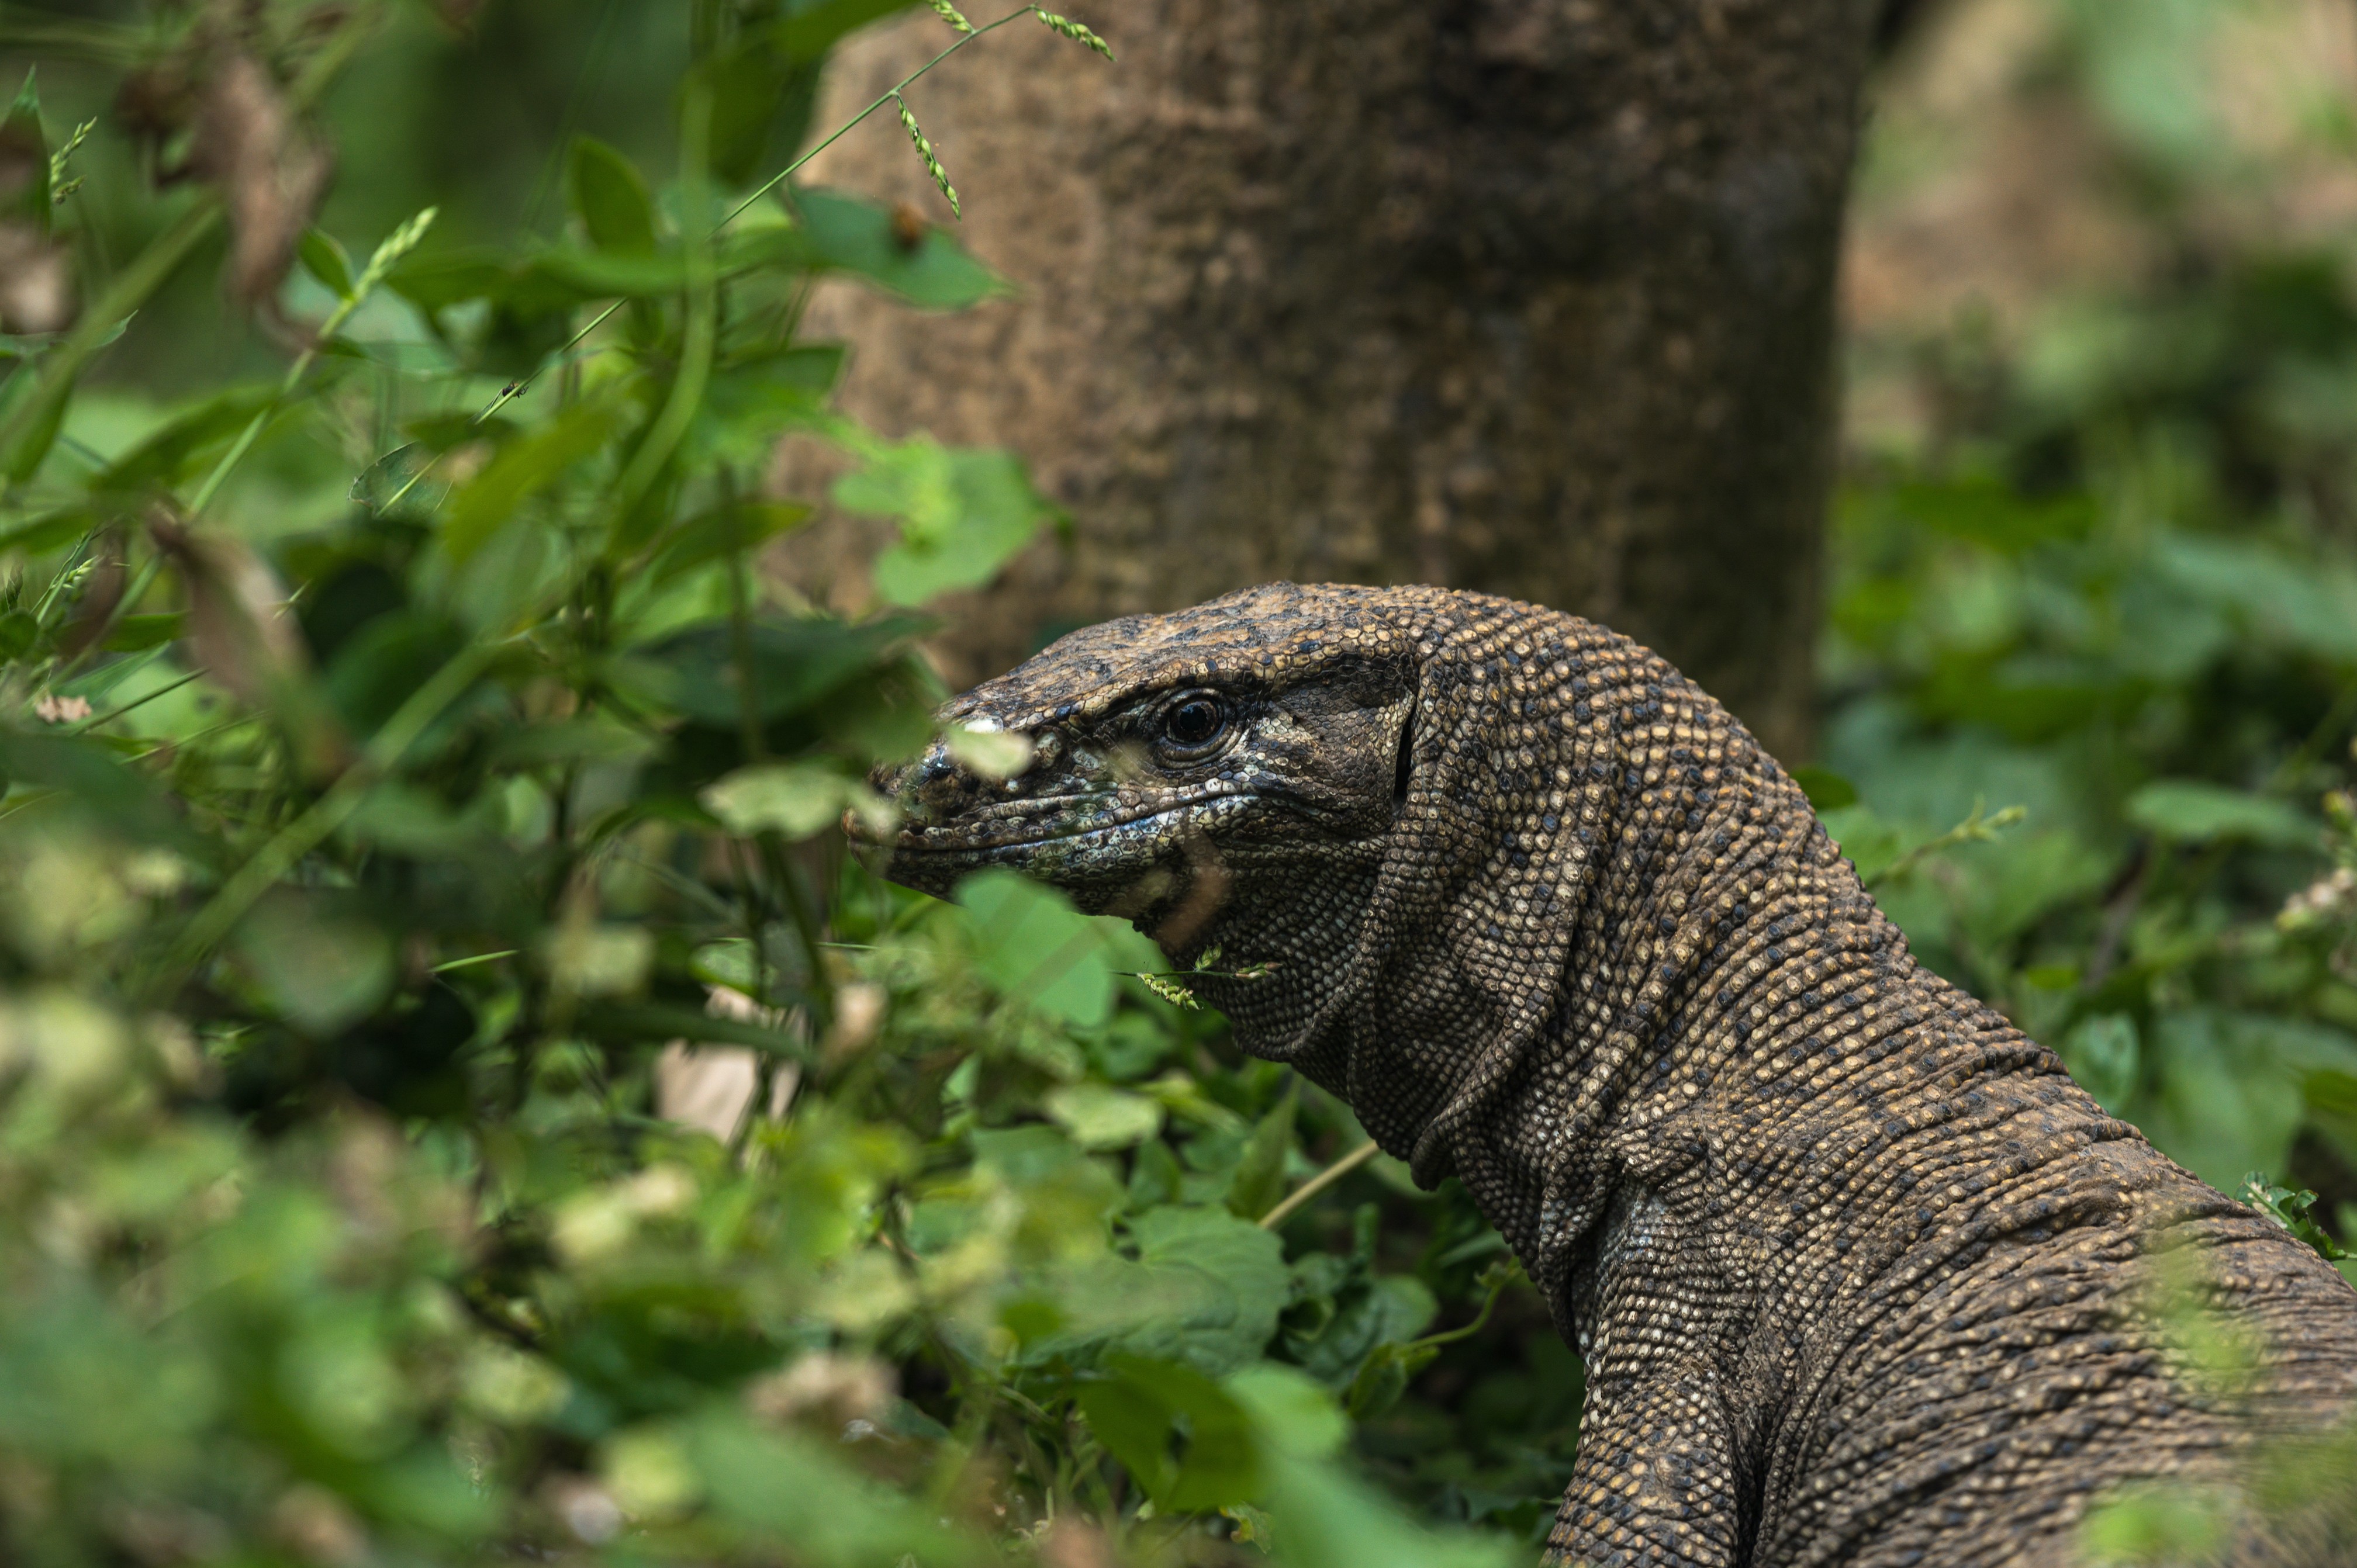 Indian Gang Sex In Forest - 4 Men Gang Raped a Protected Monitor Lizard. Experts Explain Why.